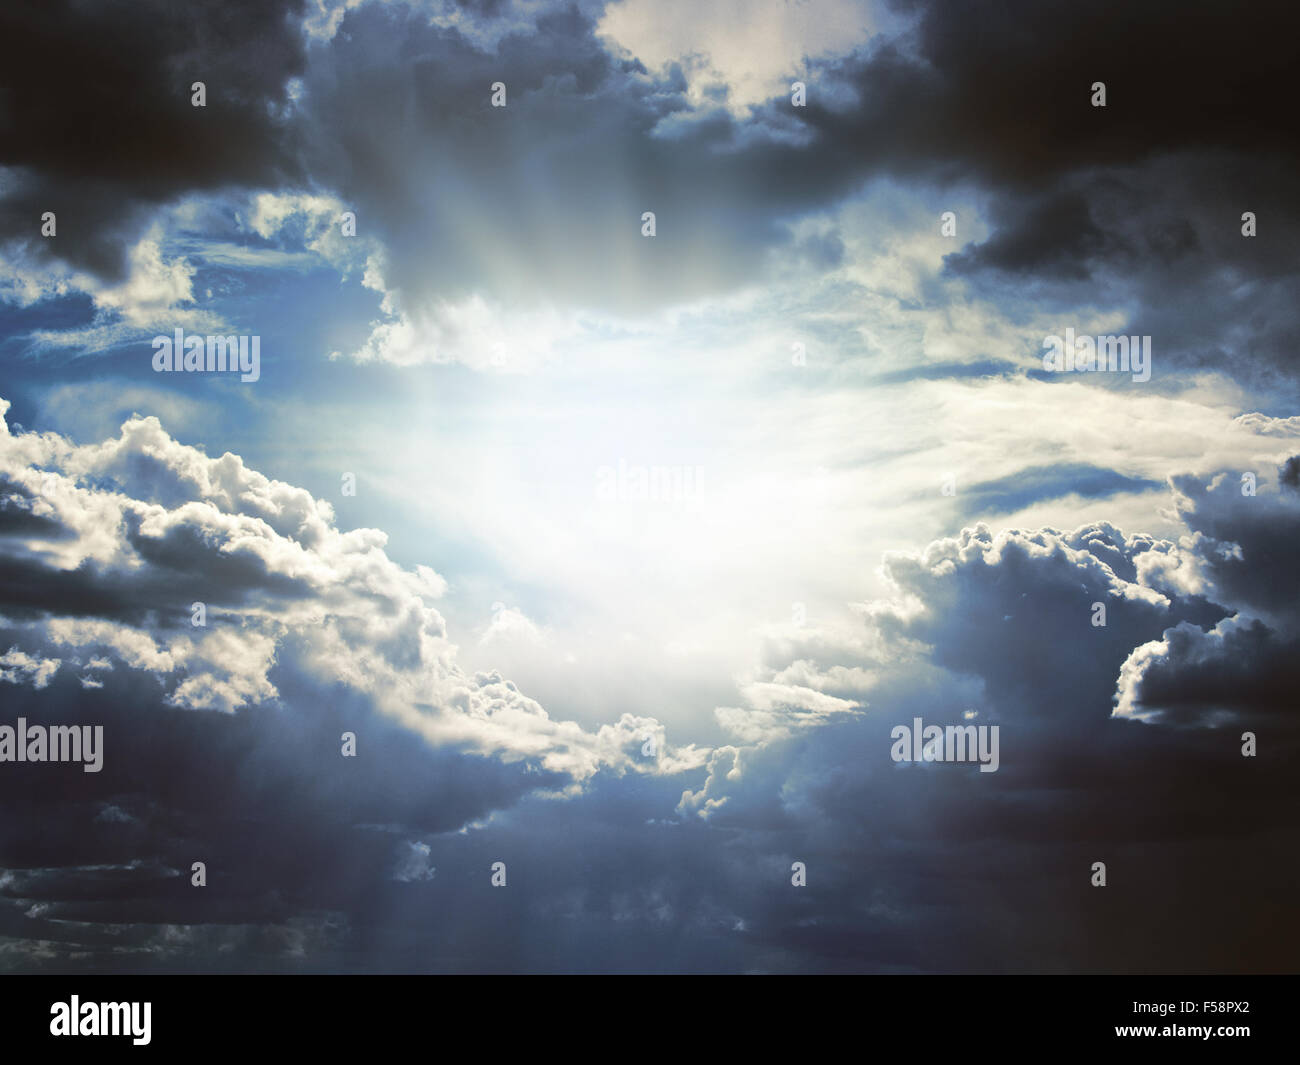 Background of dark clouds before a thunderstorm Stock Photo